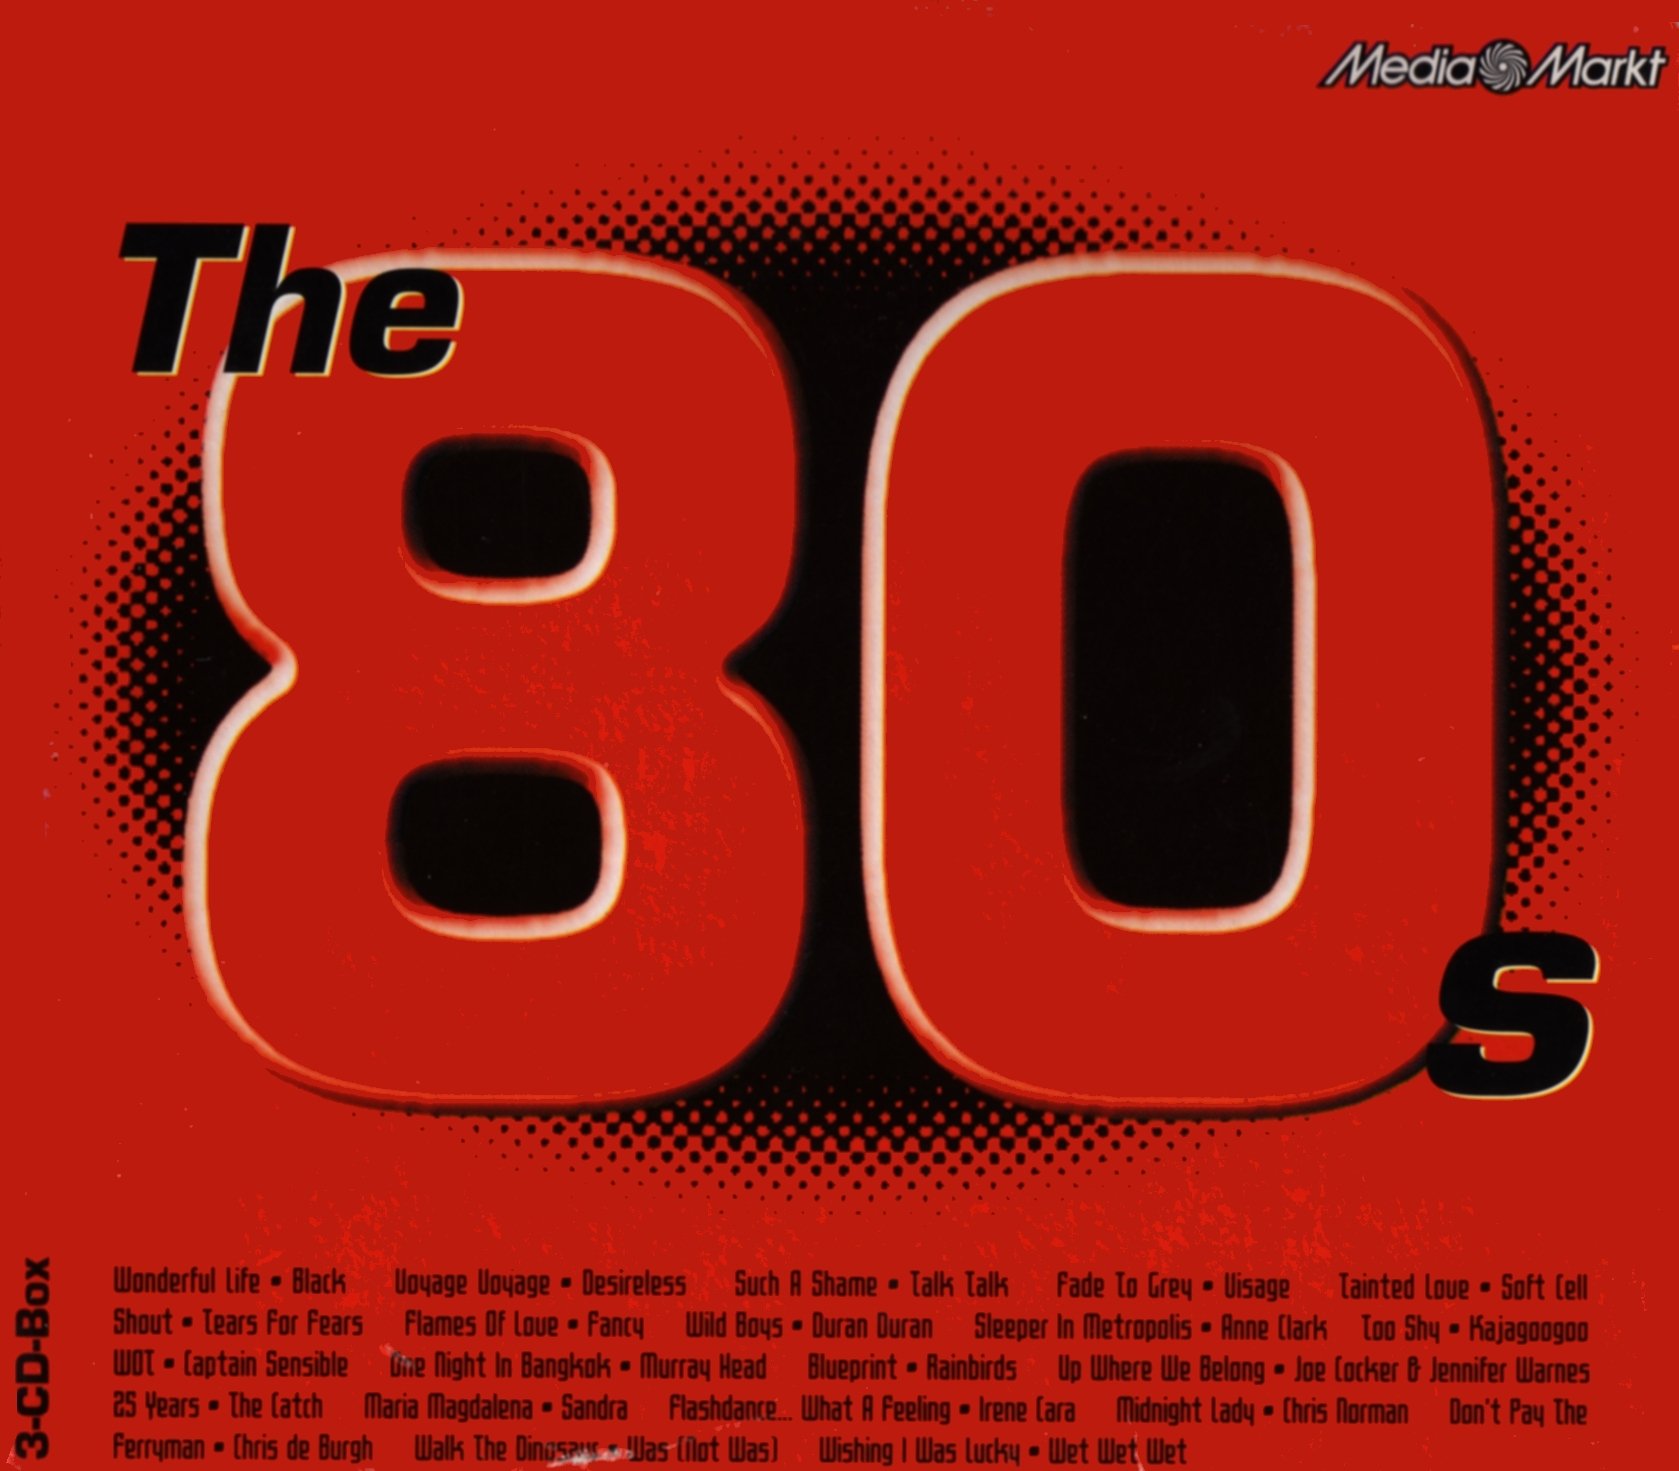 viel dosis poort Media Markt Collection: The 80s — Various Artists | Last.fm